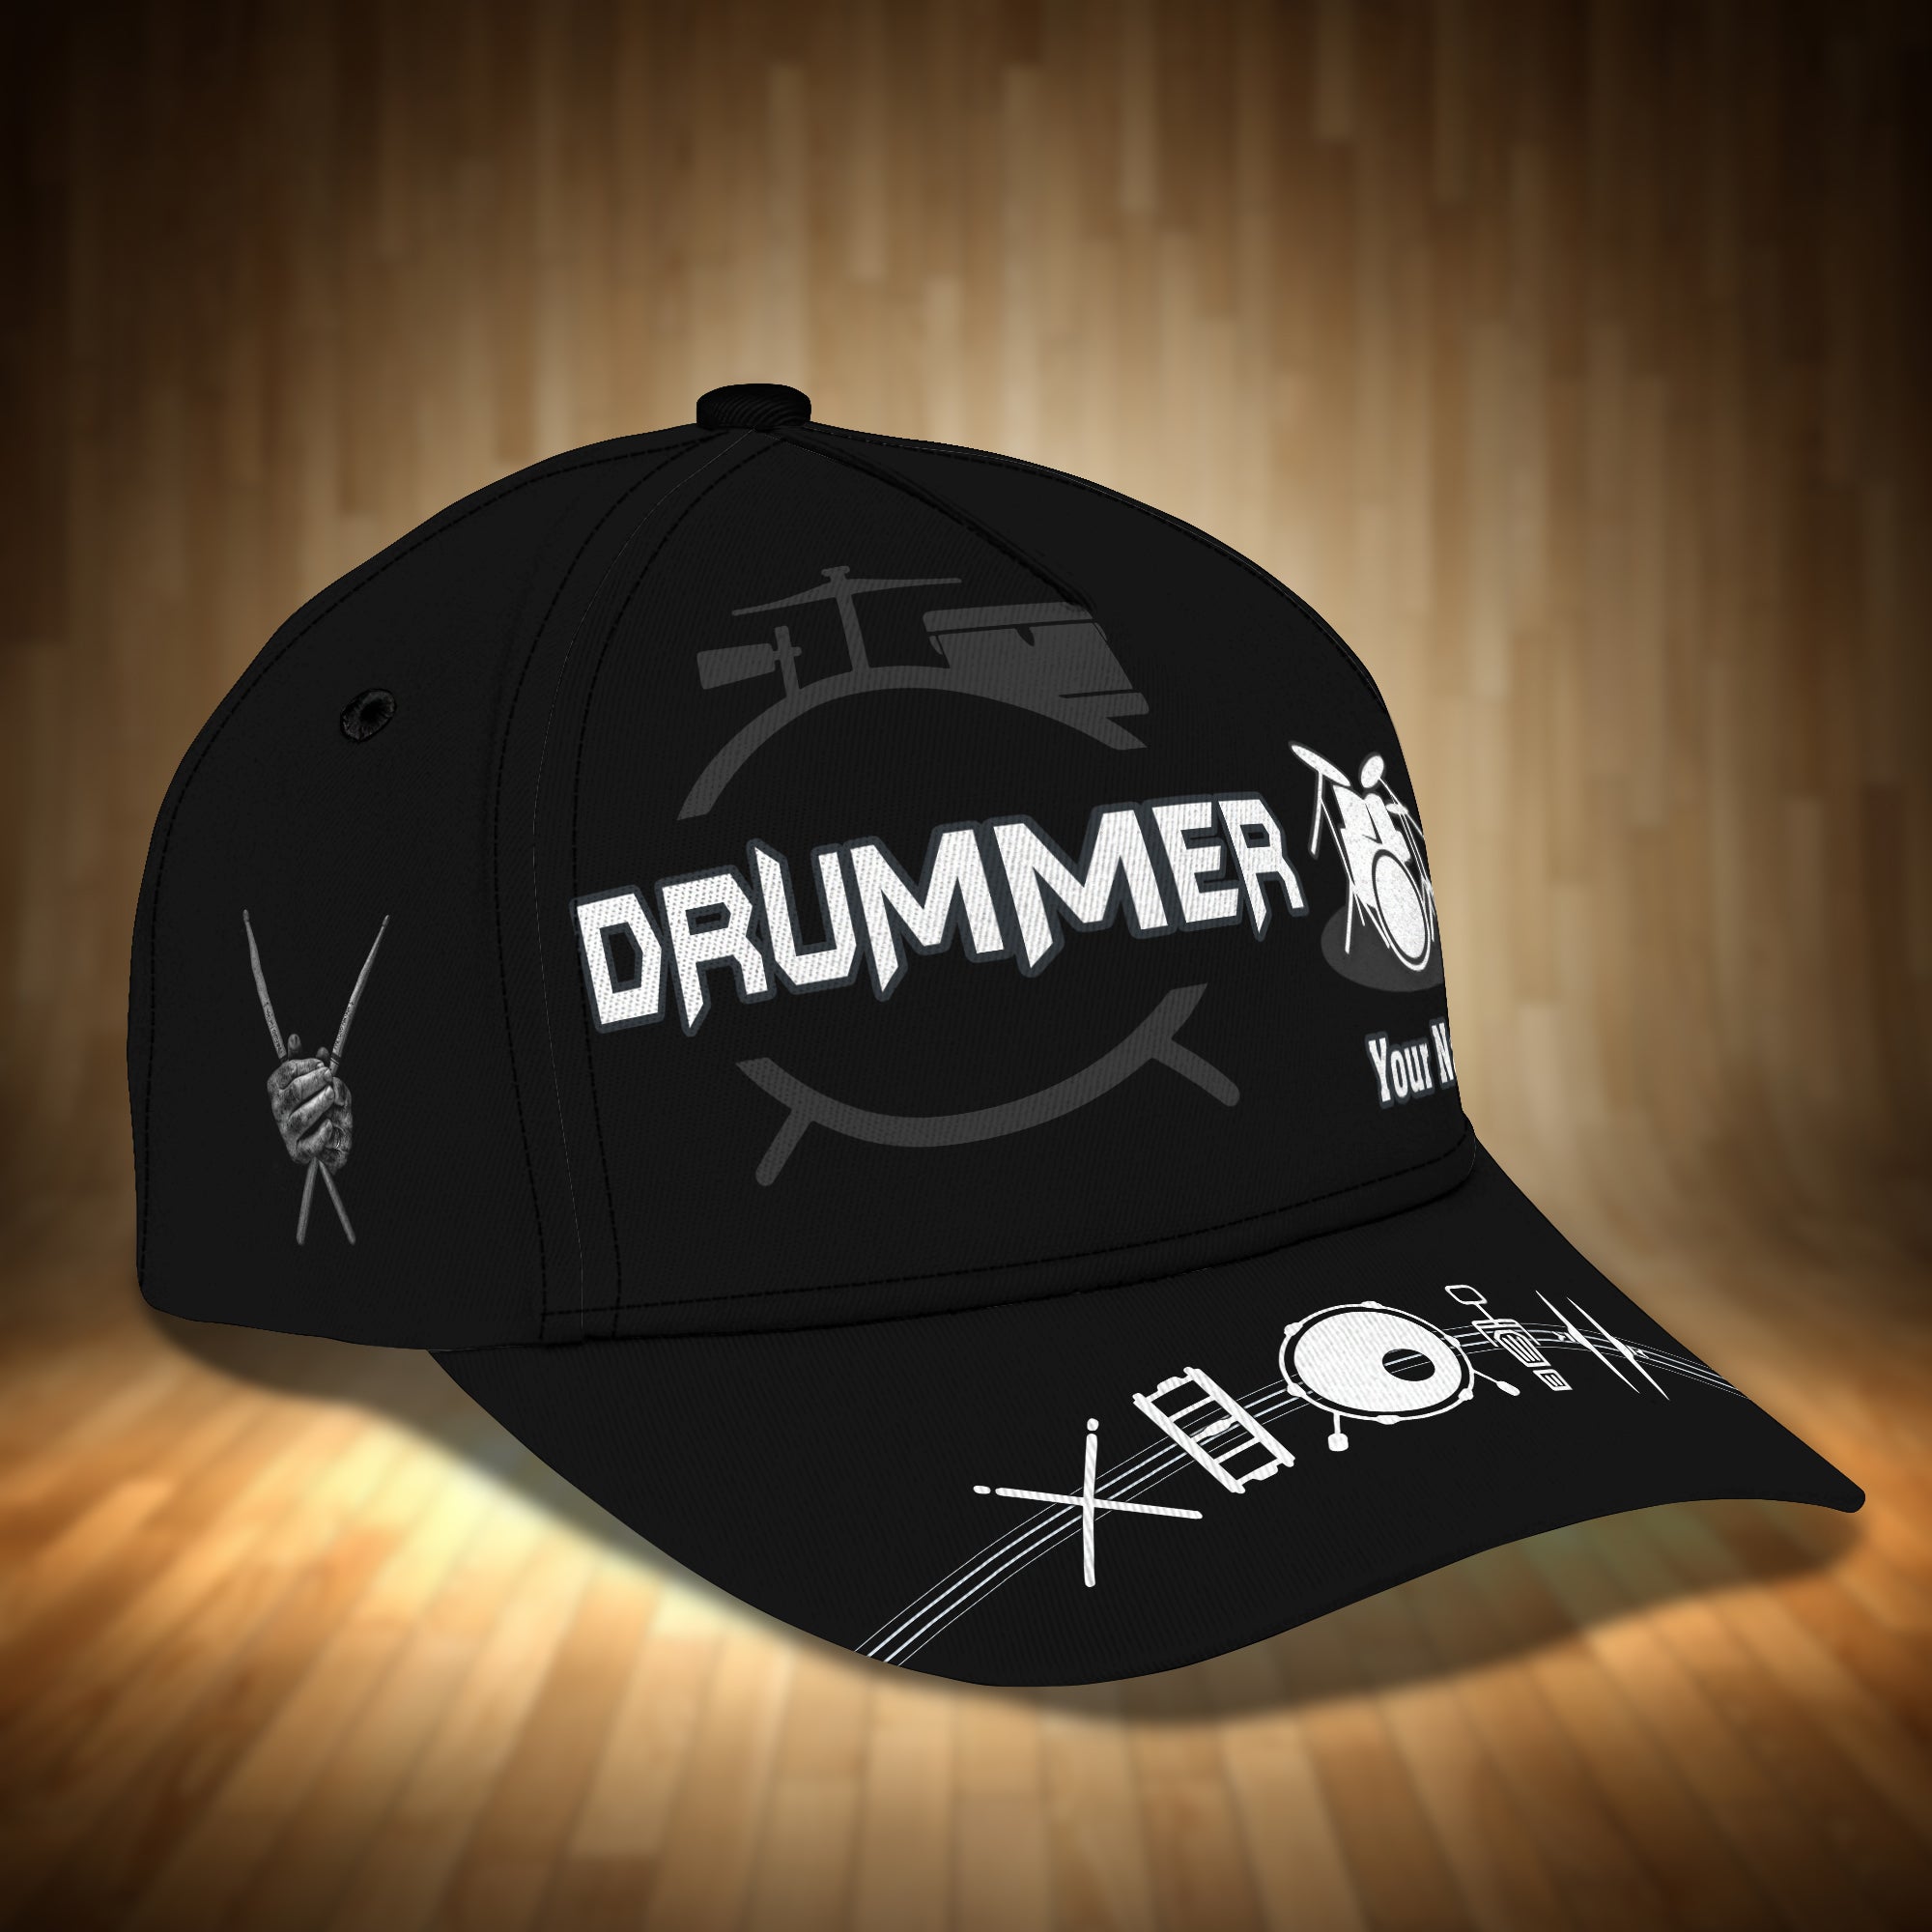 Drummer Personalized Name Cap 15 RinC